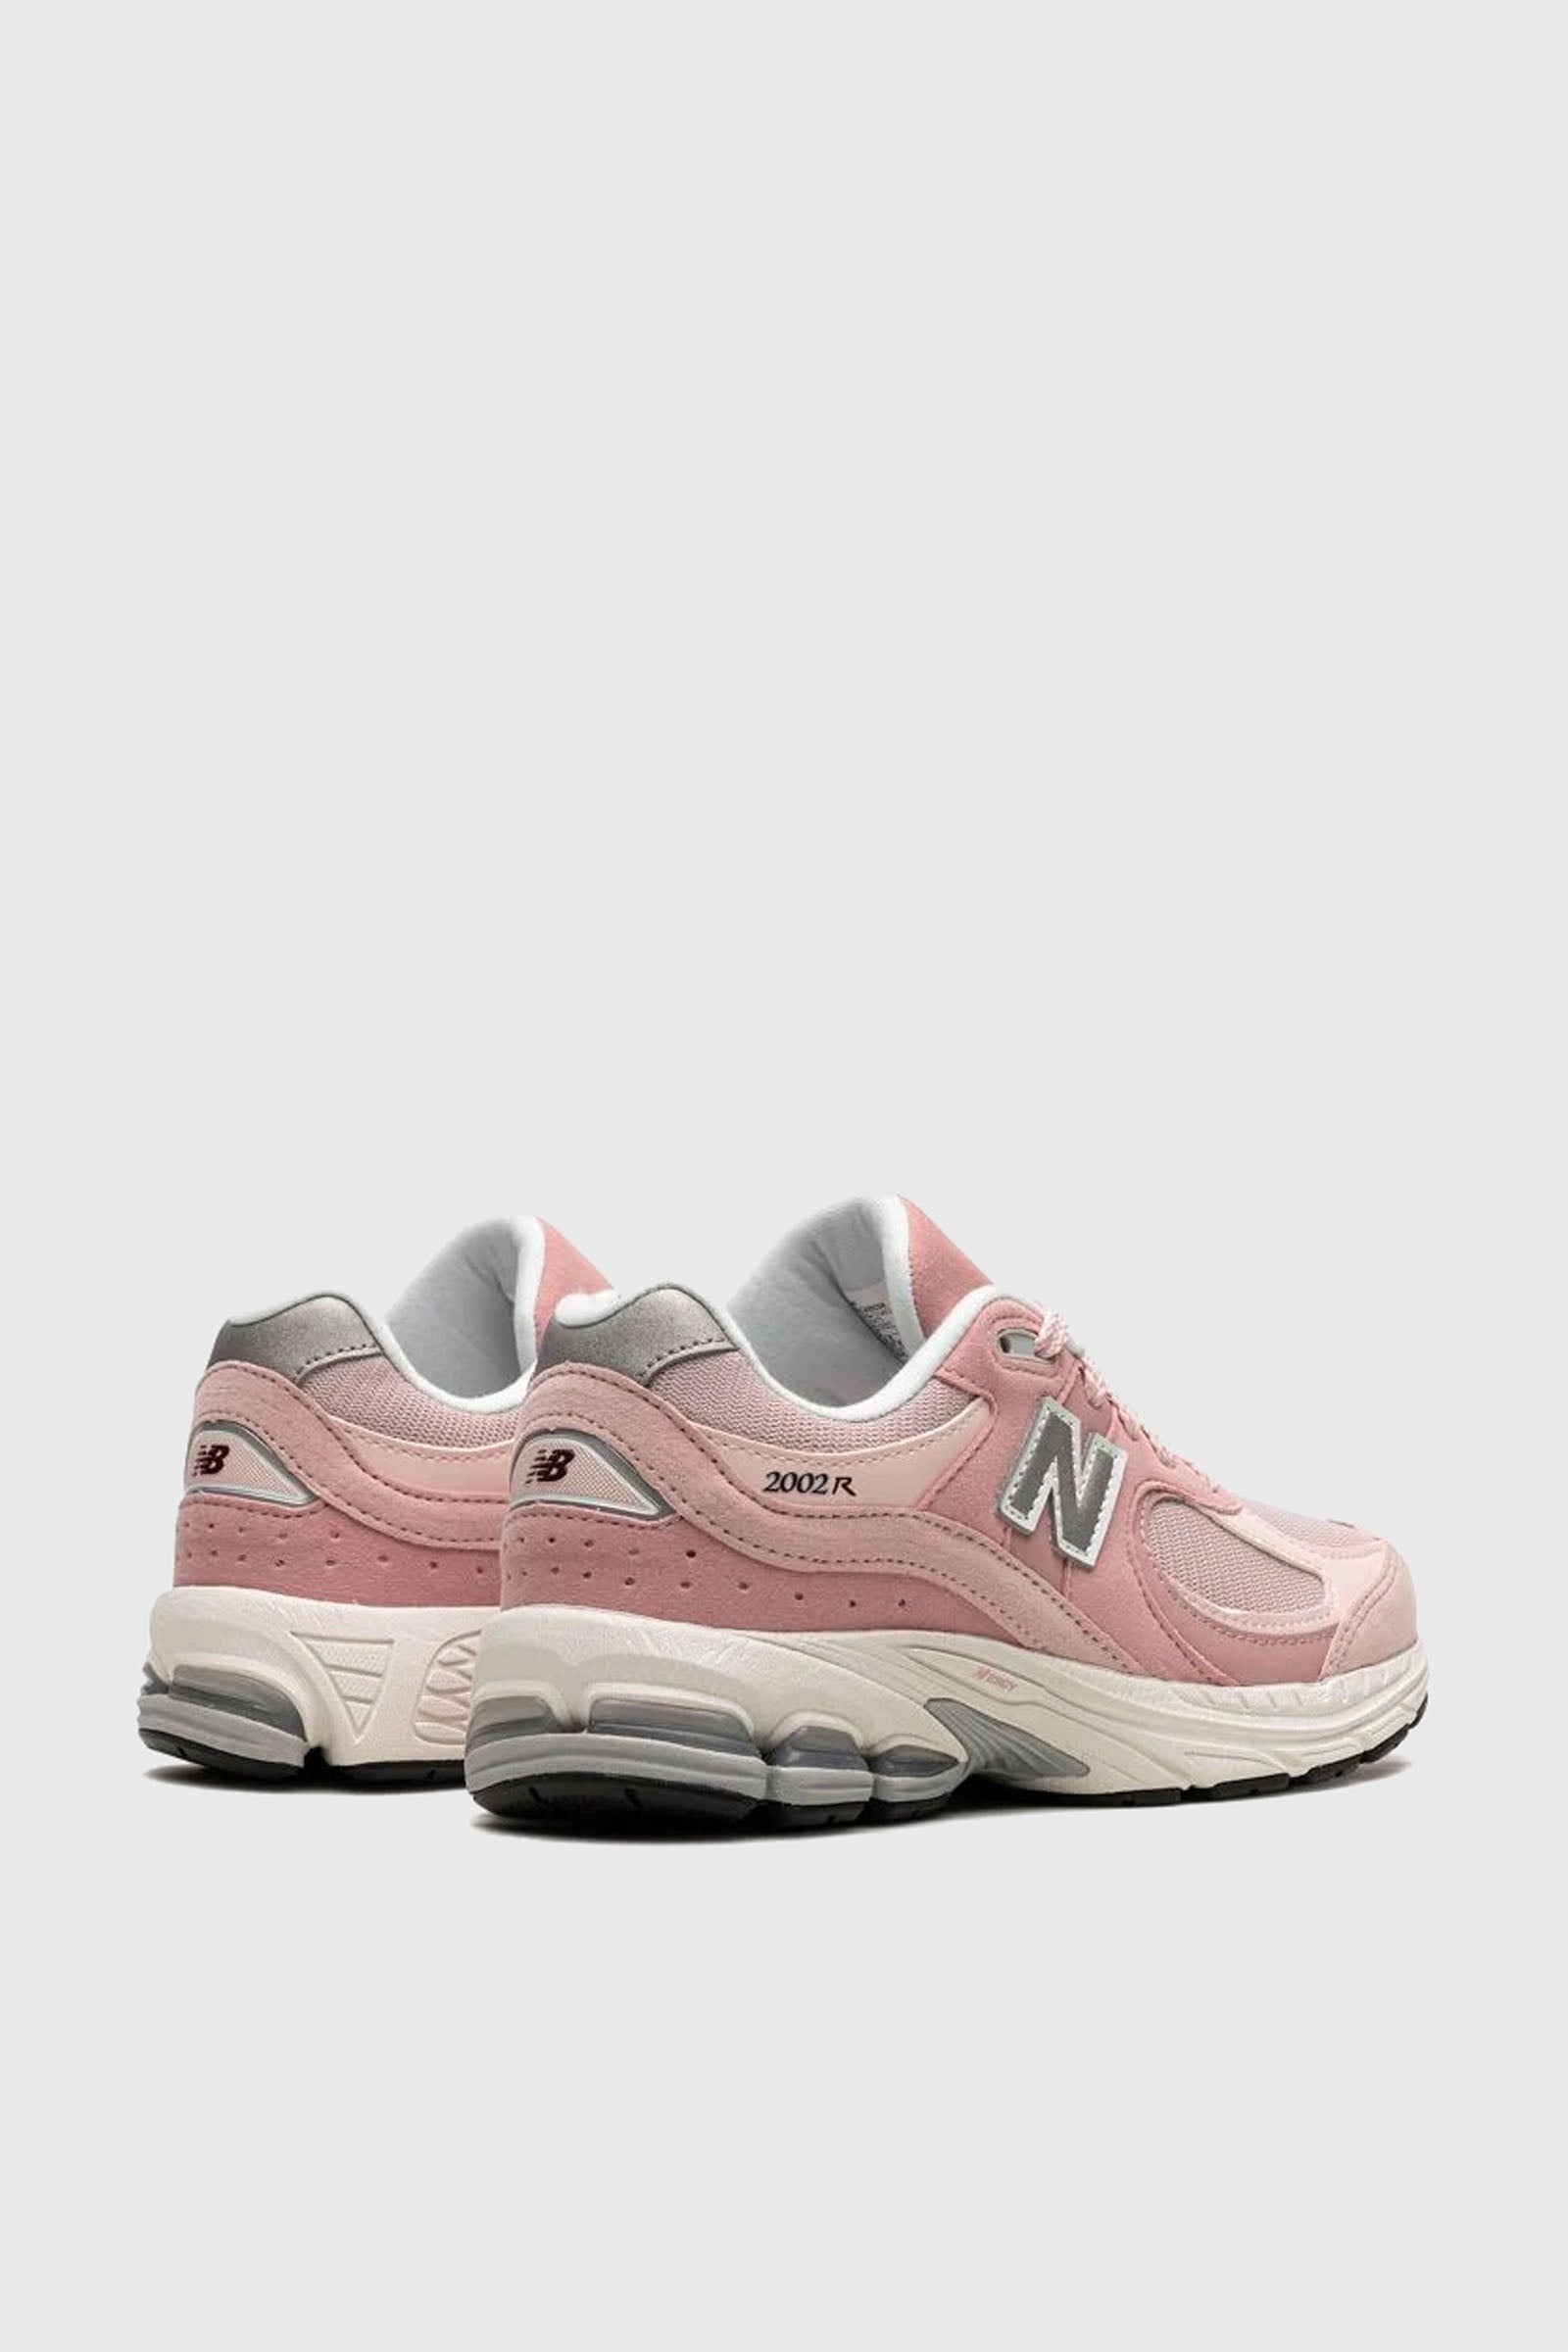 New Balance 2002R Synthetic Pink Sneakers - 4